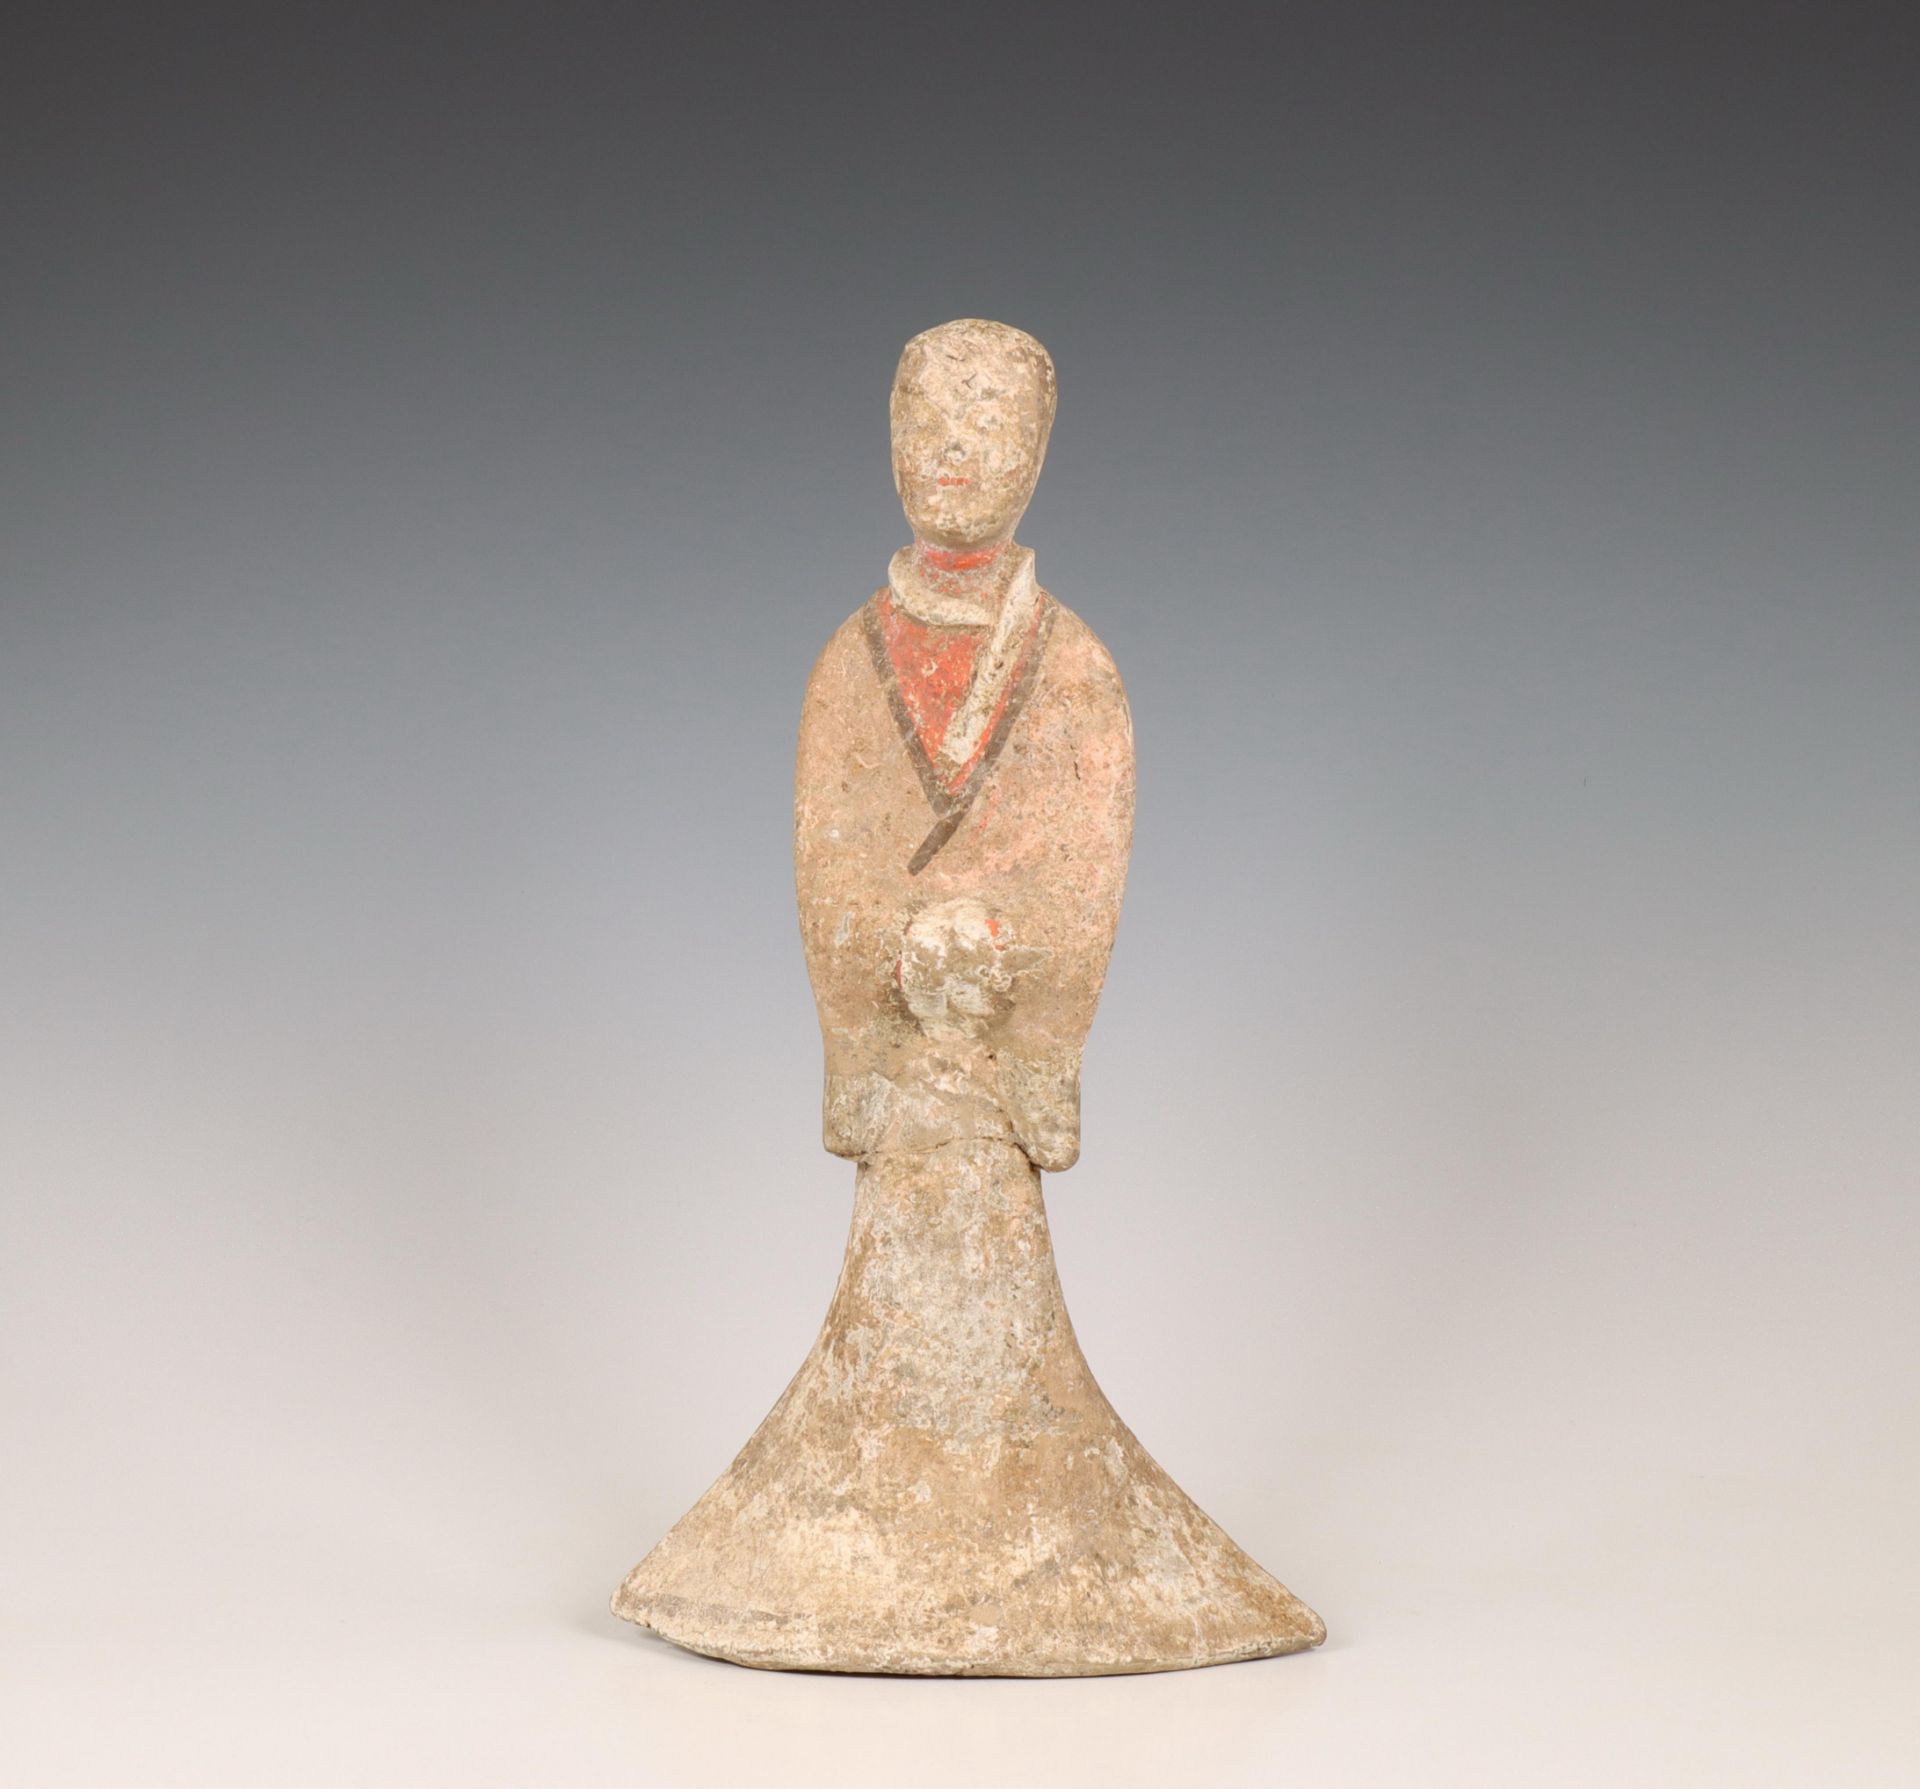 China, pottery model of a standing lady, probably Han dynasty (206 BC-220 AD),